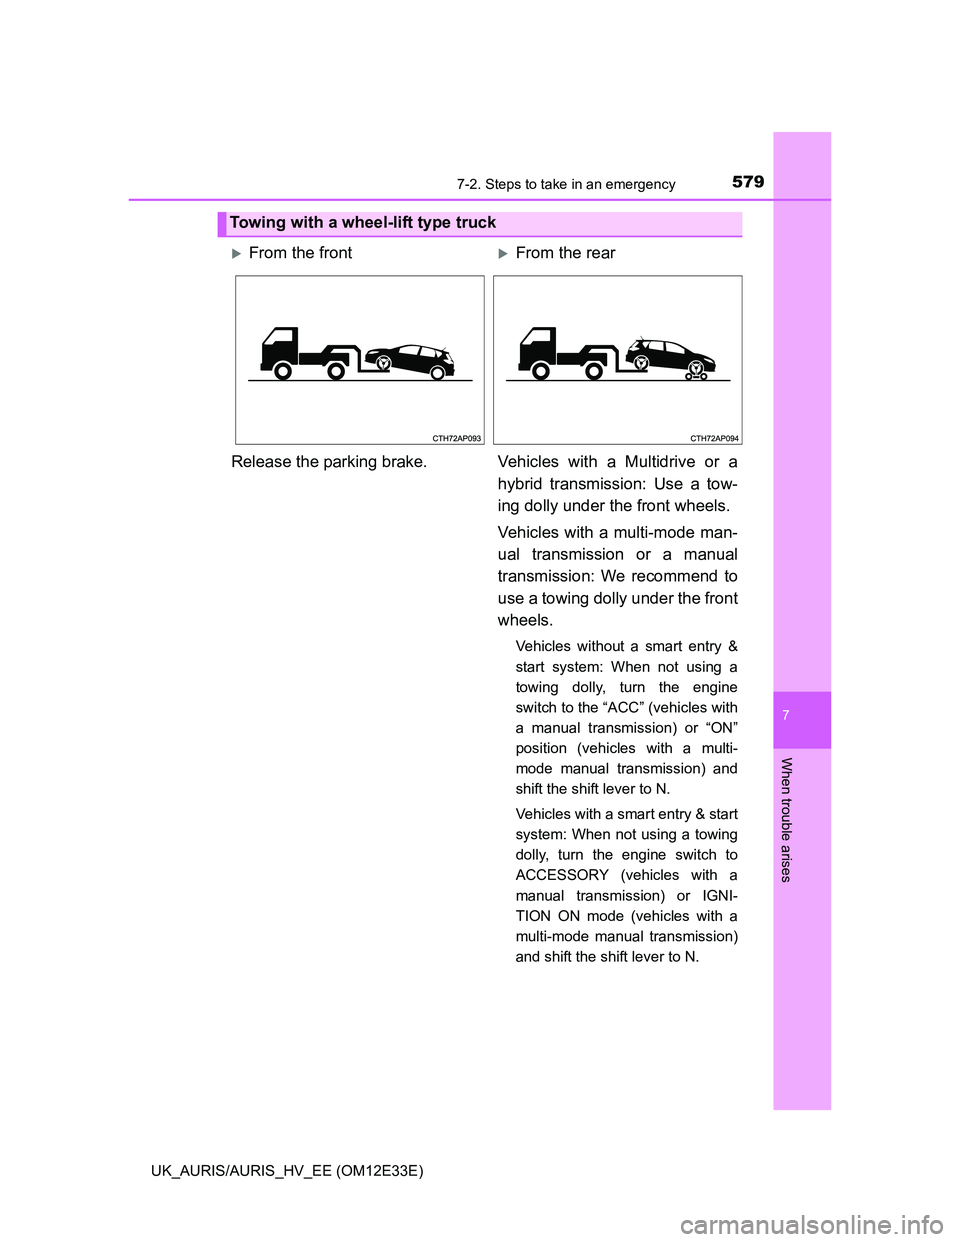 TOYOTA AURIS 2012  Owners Manual (in English) 5797-2. Steps to take in an emergency
UK_AURIS/AURIS_HV_EE (OM12E33E)
7
When trouble arises
Towing with a wheel-lift type truck
From the frontFrom the rear
Release the parking brake. Vehicles wi